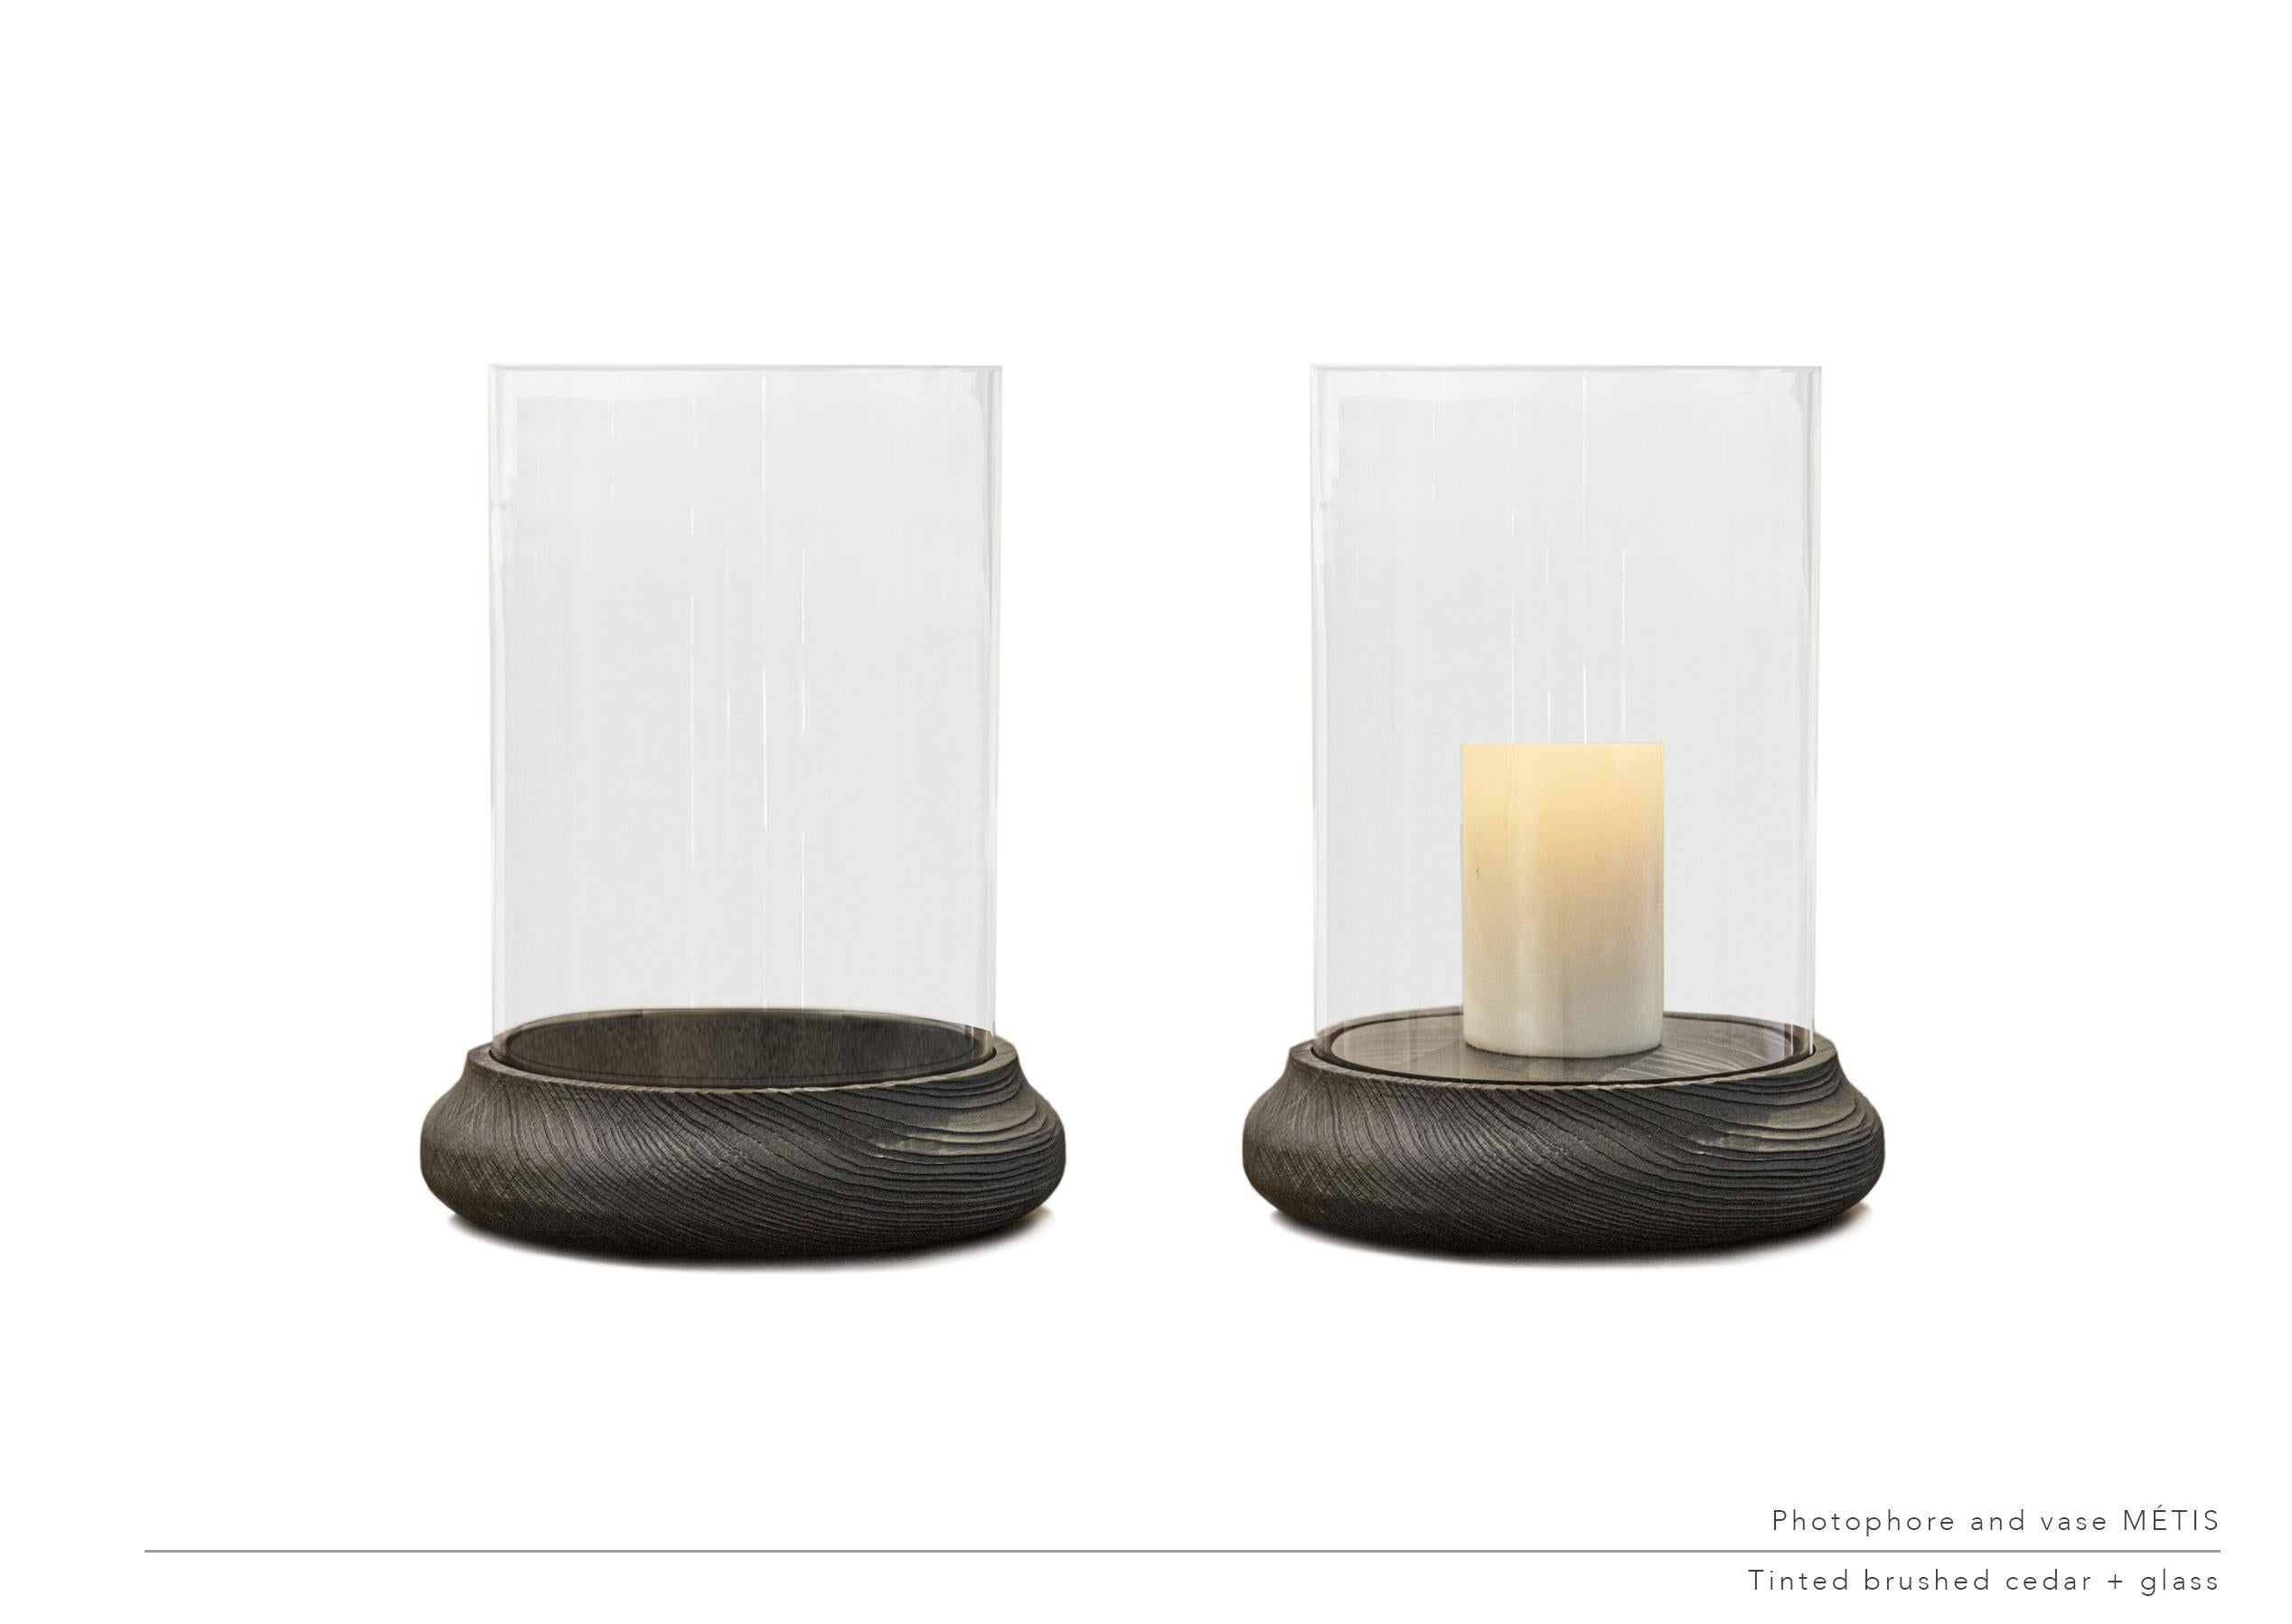 Set of 2 Metis vase candleholders by LK Edition
Dimensions: diameter 32 x height 4cm
Materials: Oak, Glass, and patinated Bronze base.


It is with the sense of detail and requirement, this research of the exception by the selection of noble